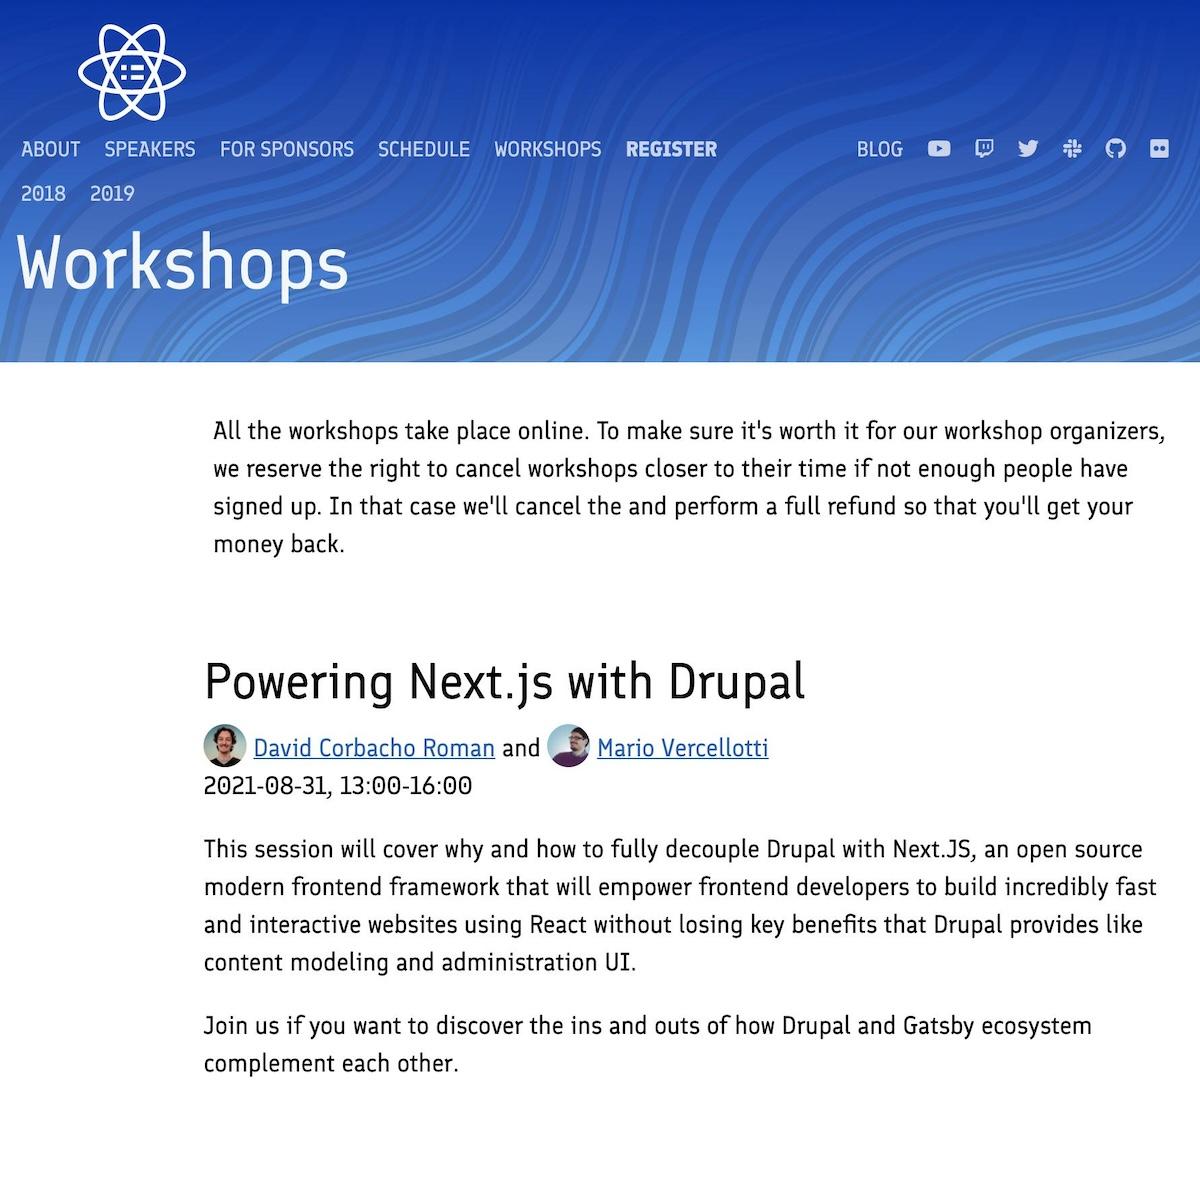 React Finland website Workshops page with details about the Powering Next.js with Drupal workshop.